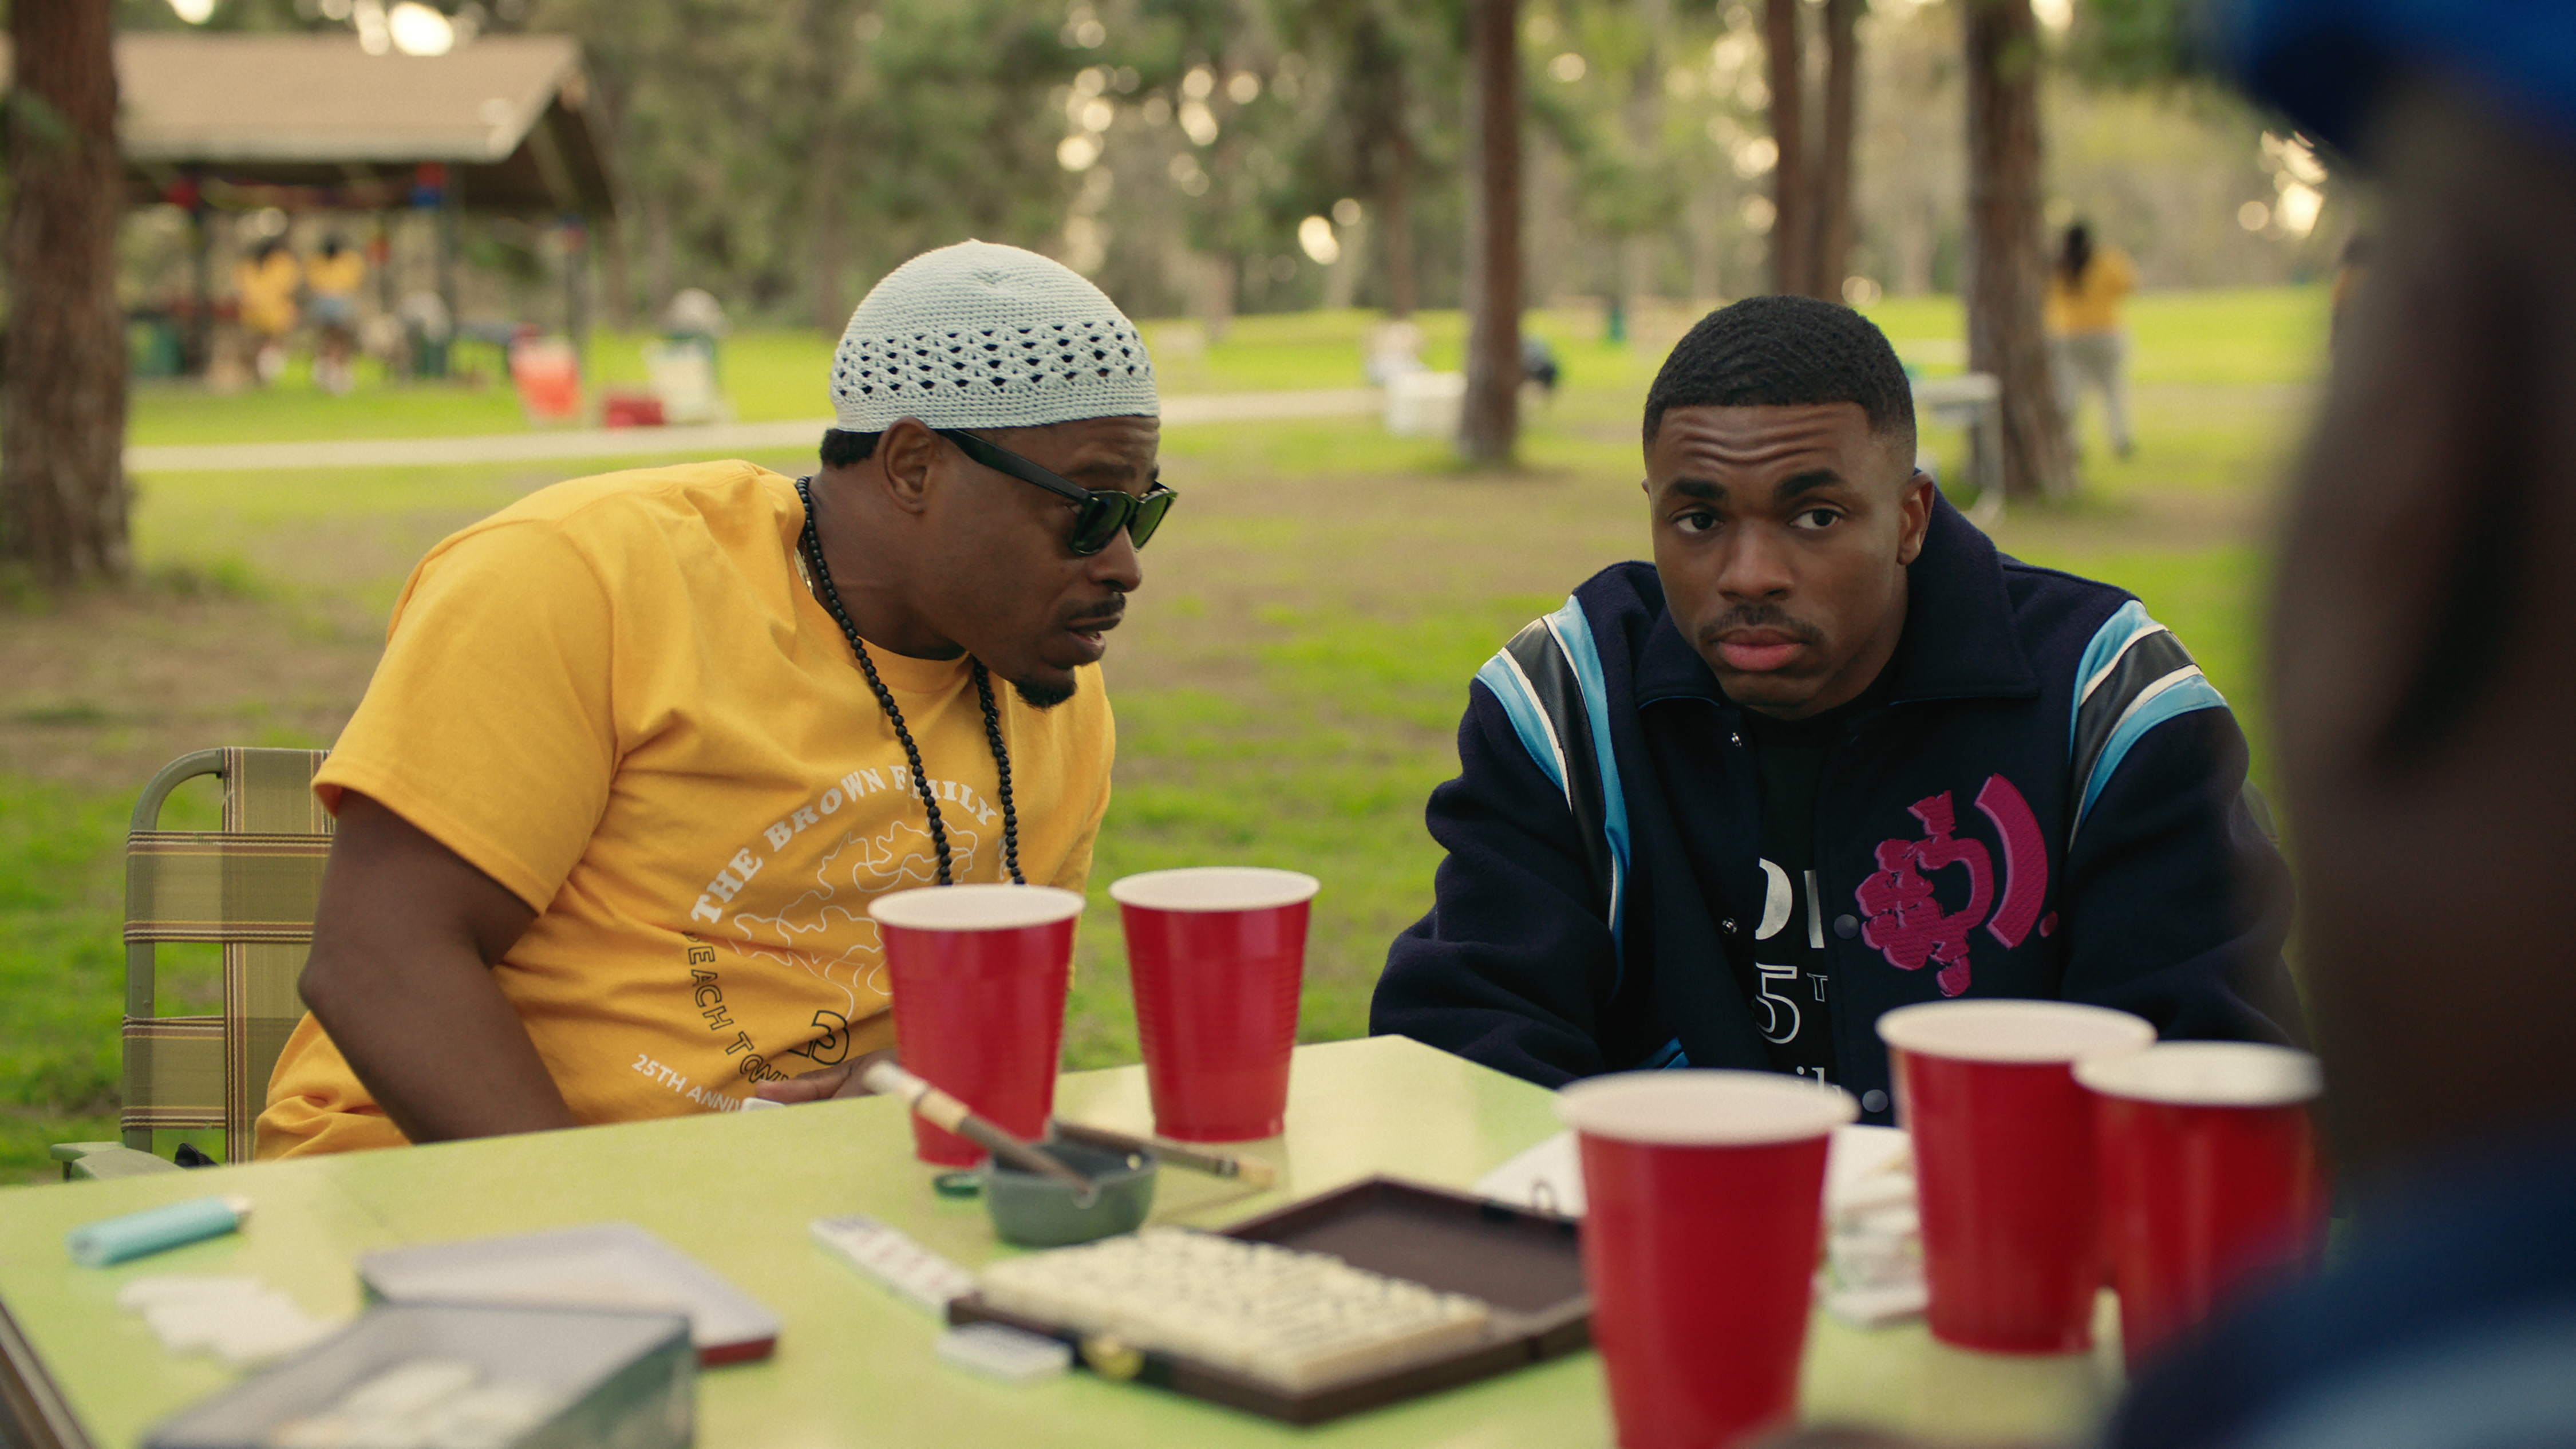 Kareem Grimes as Uncle Mike talking at a table in a park to Vince Staples as Vince Staples in a still from The Vince Staples Show